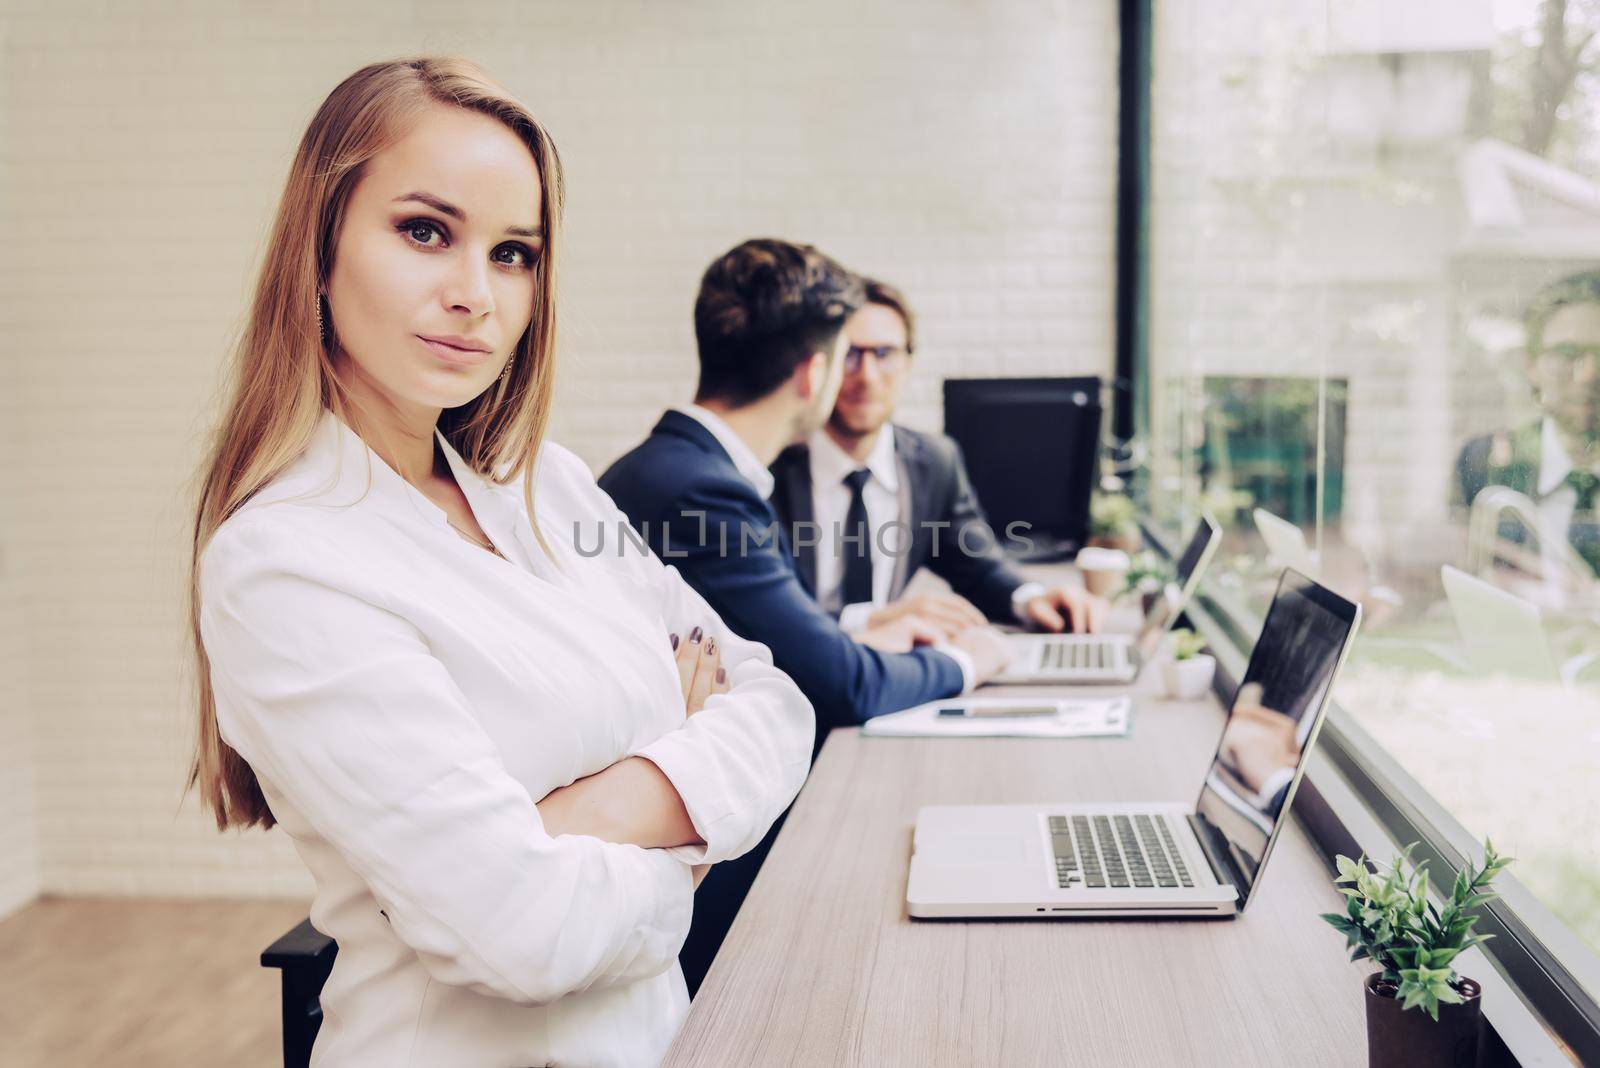 Business woman working with business team by laptop computer. Beauty and Technology concept. Smart lady and working woman theme. Office and happy life theme.